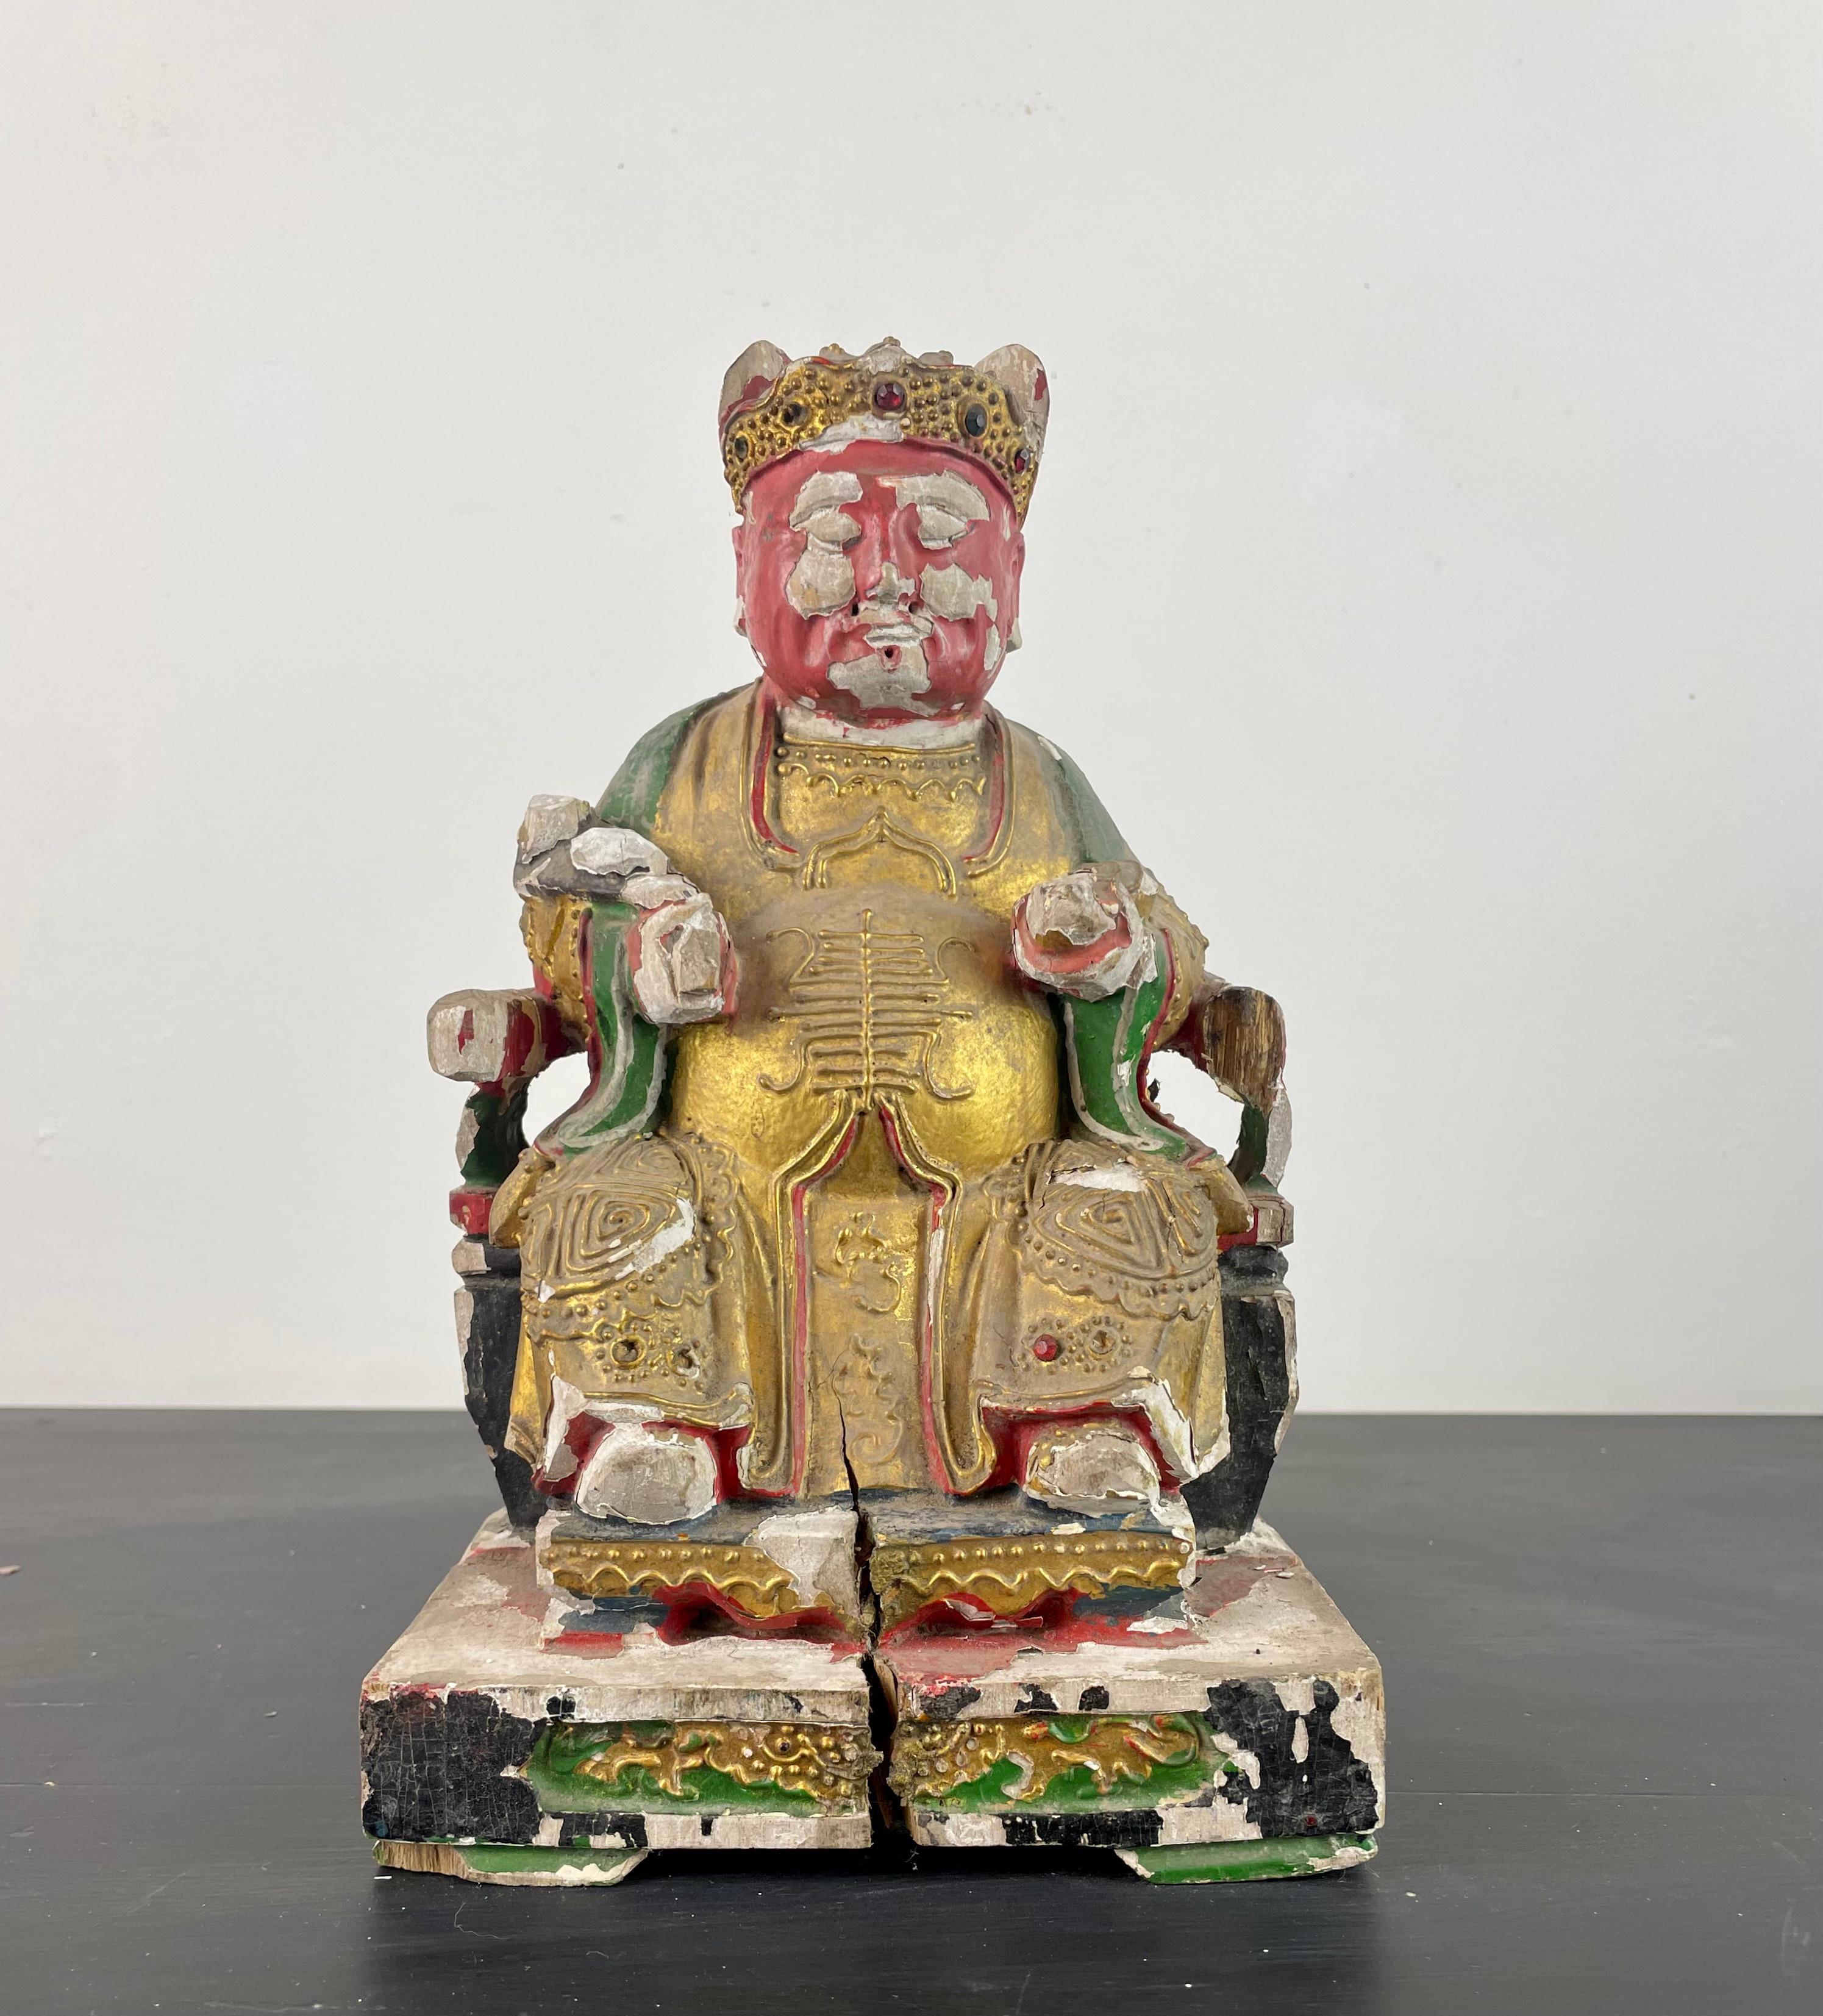 Very beautiful Taoist statue in polychrome and gold lacquered wood. It is carved from solid wood, with hand-painted details and embossed ornaments on the clothing.

This Statuette may represent a Taoist dignitary seated on his throne, who would wear